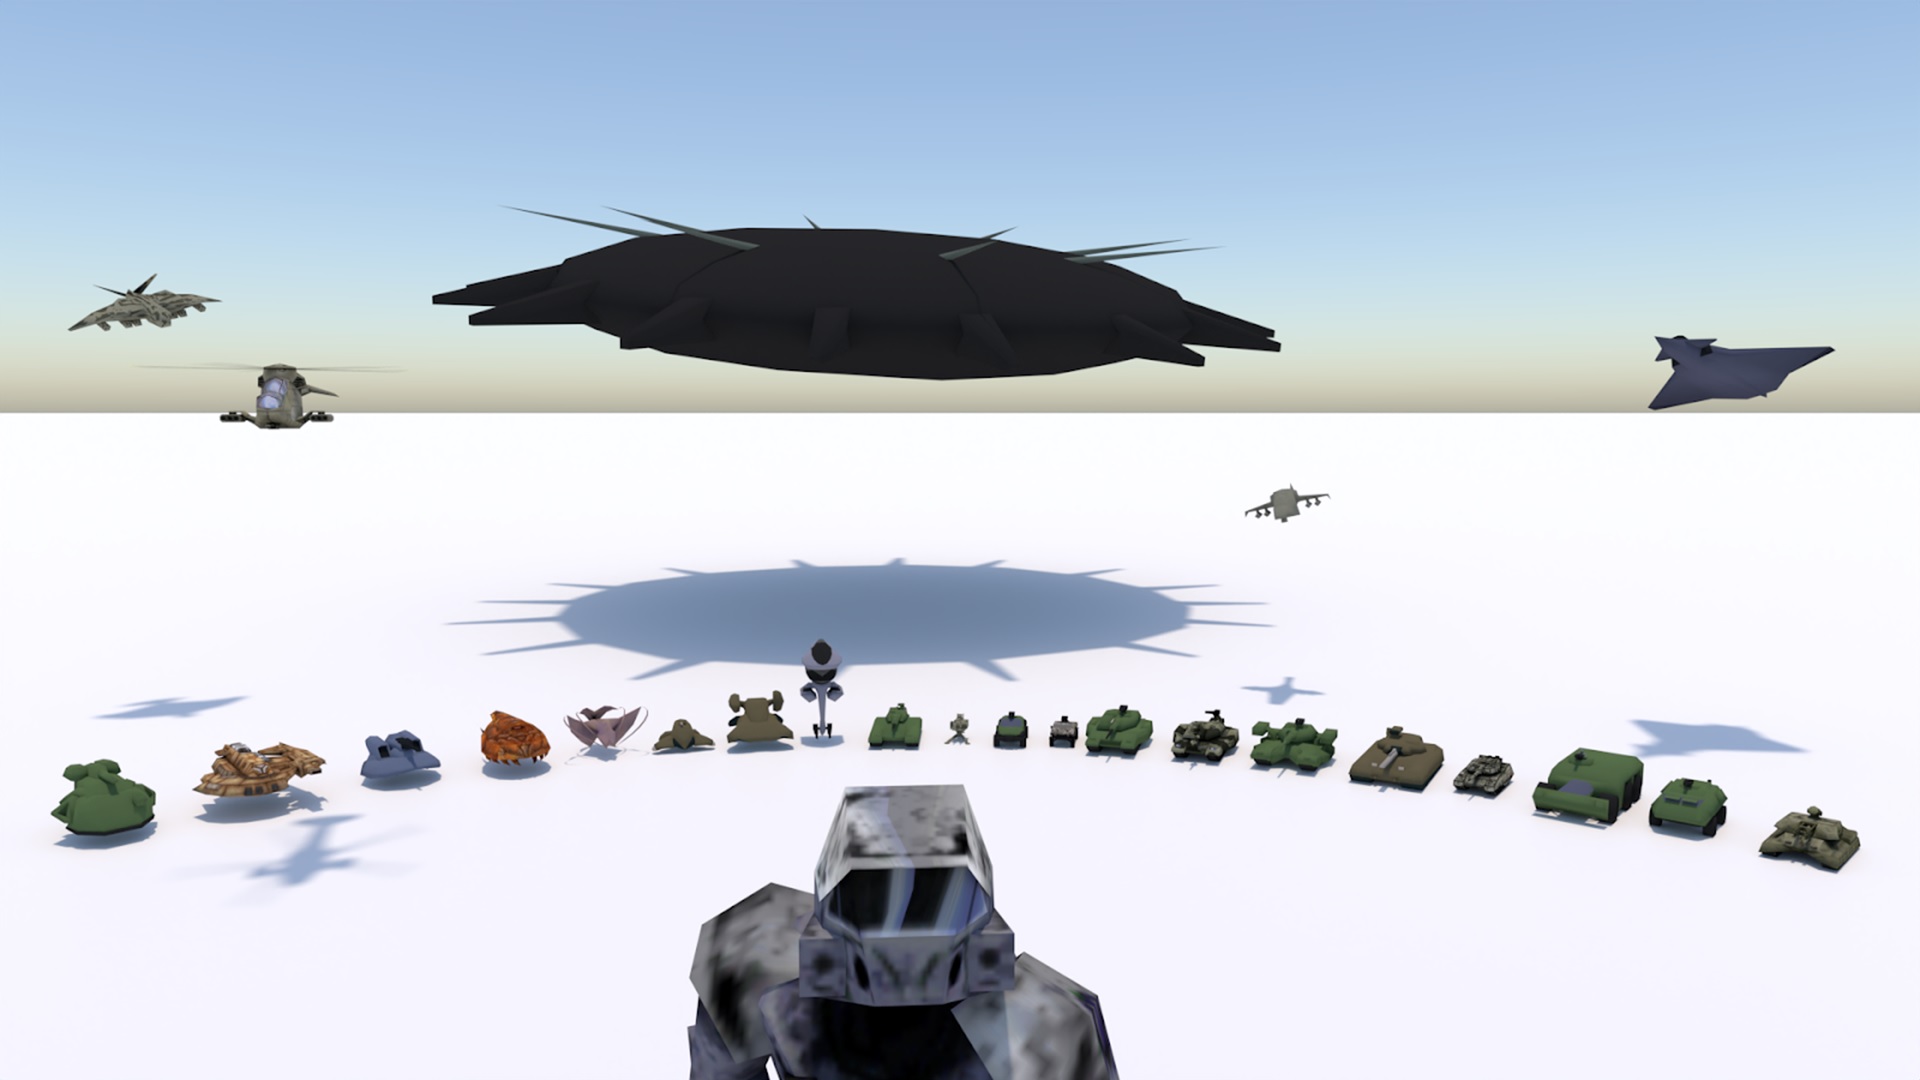 An image of several reclaimed vehicles from Halo's RTS days. They're low-poly, and very cute.